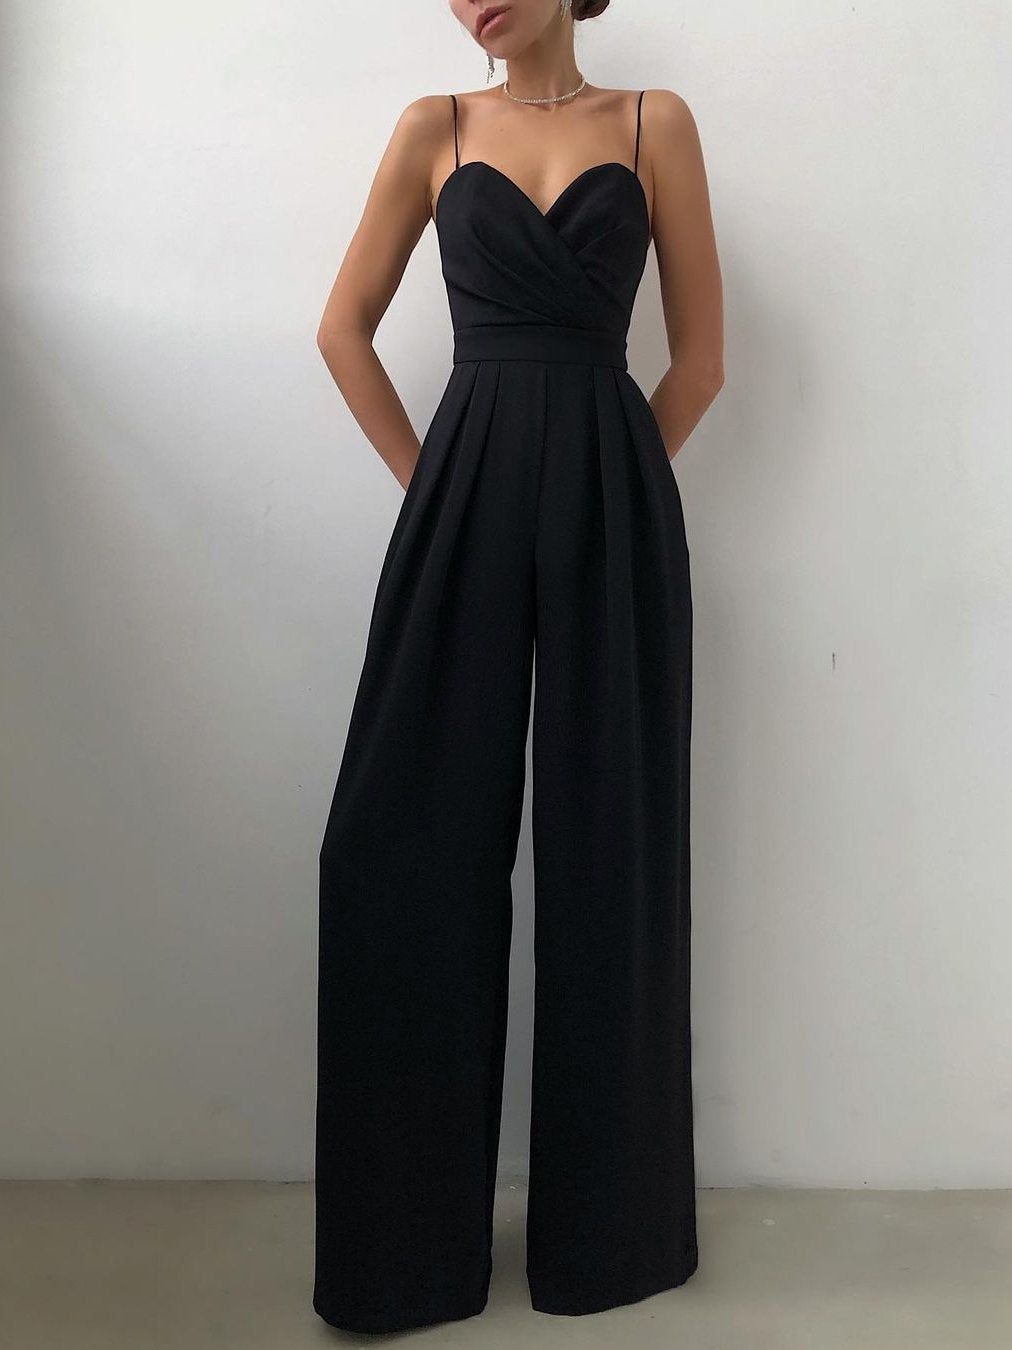 Womens Jumpsuits: Effortless Style with Chic and Comfortable Women’s Jumpsuits